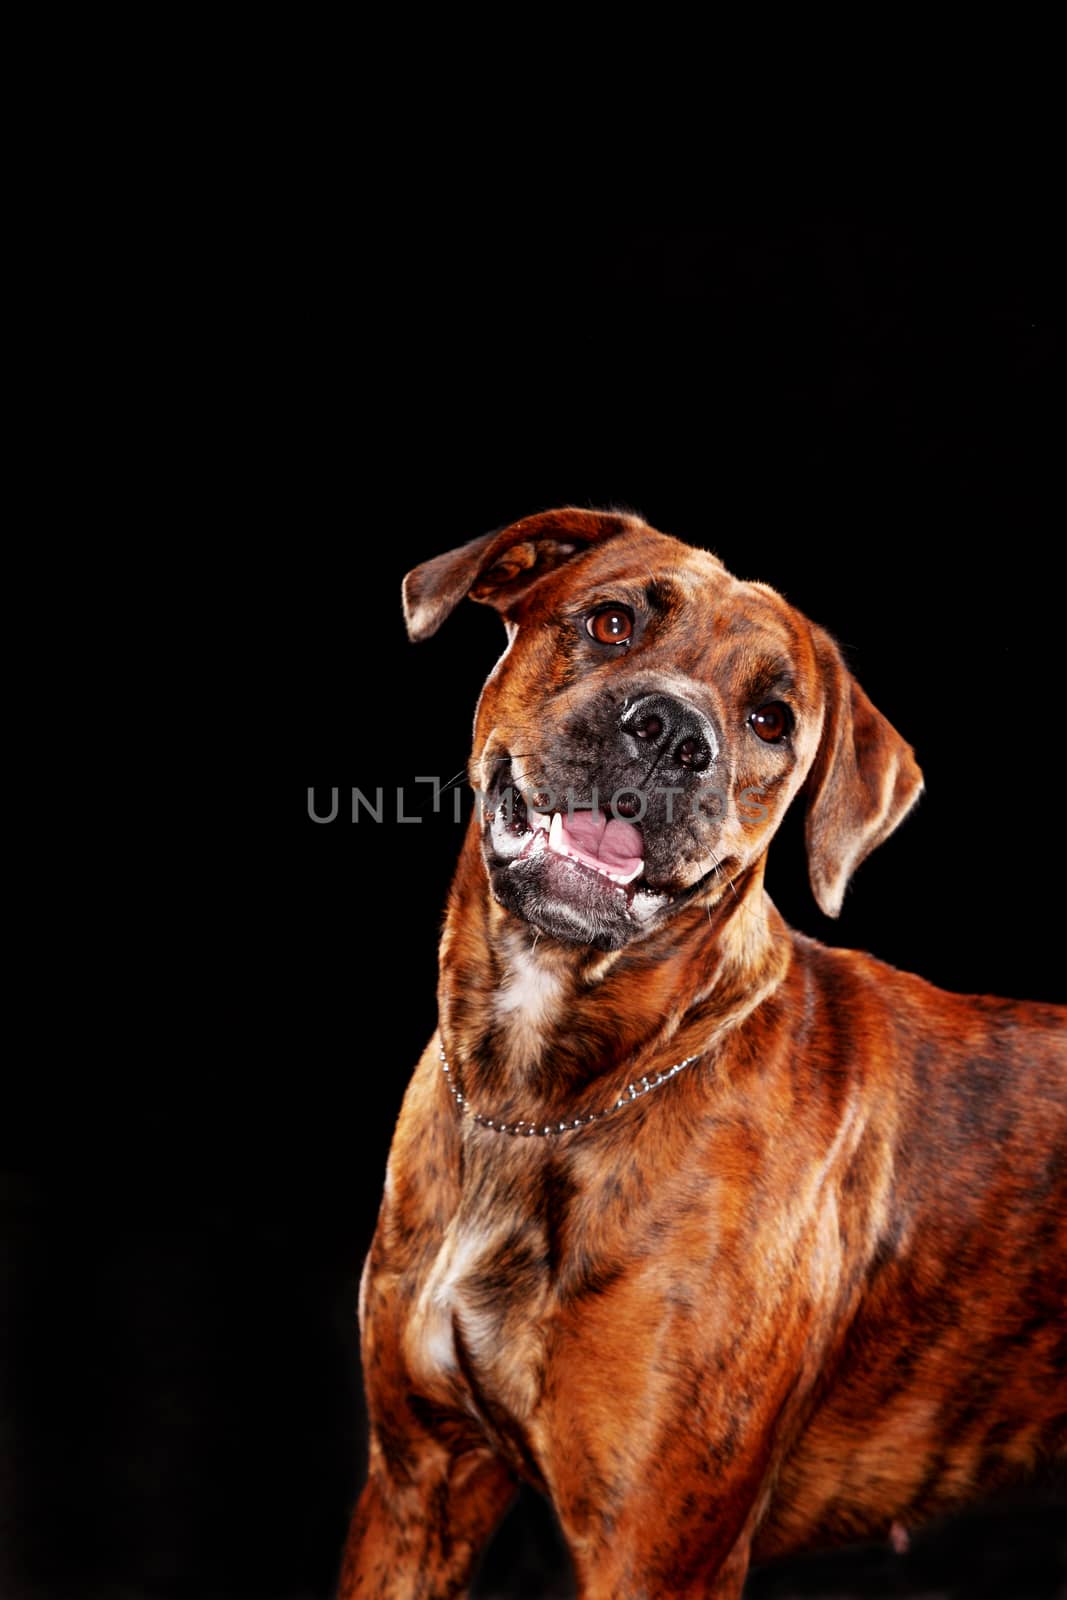 Young mixed-breed / boxer dog looking up on black background